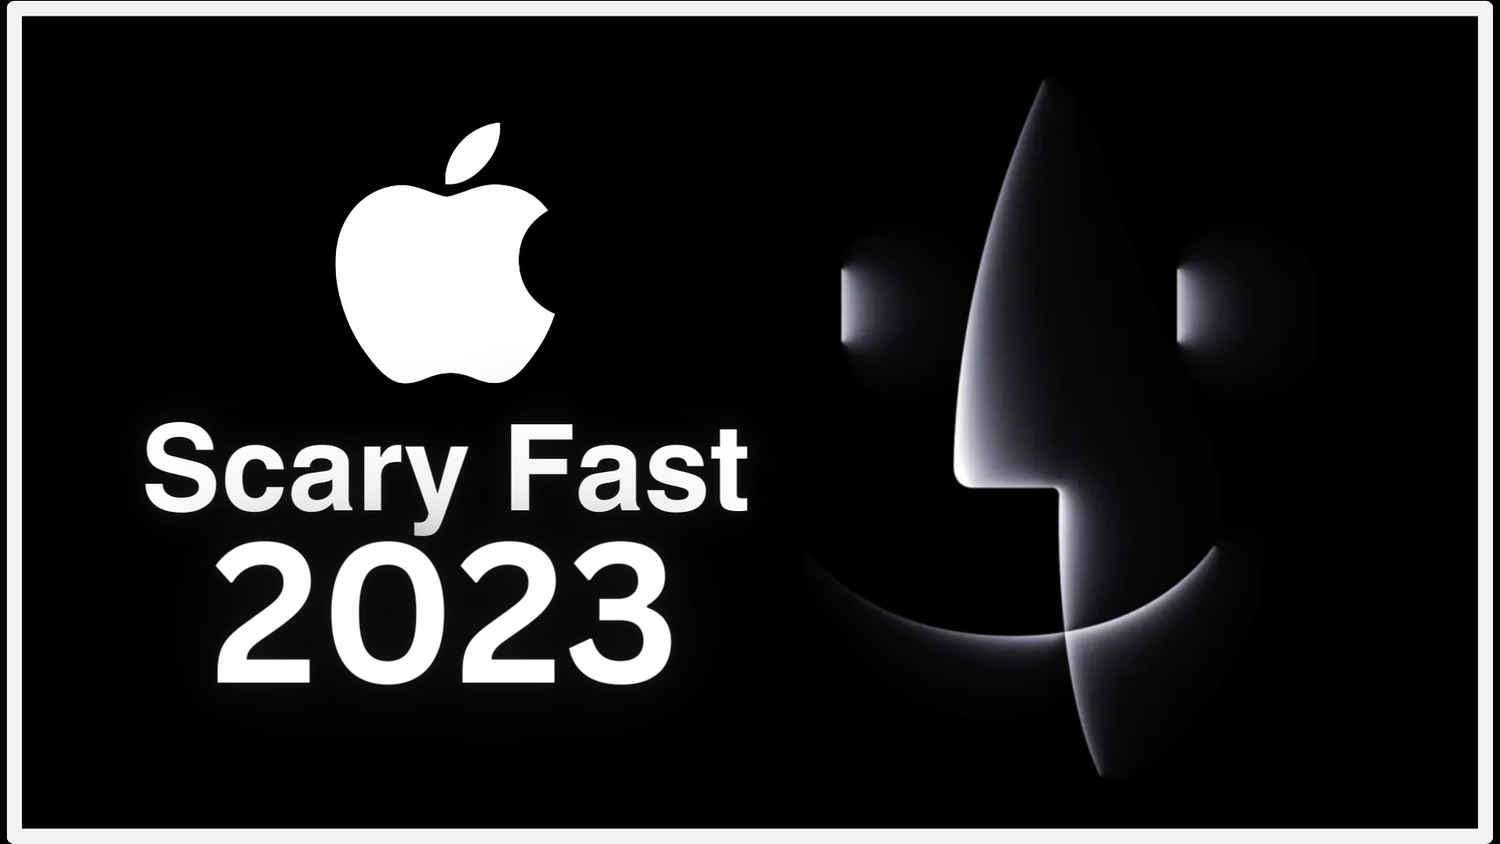 Apple Scary Fast Event — Most exciting announcements in one place